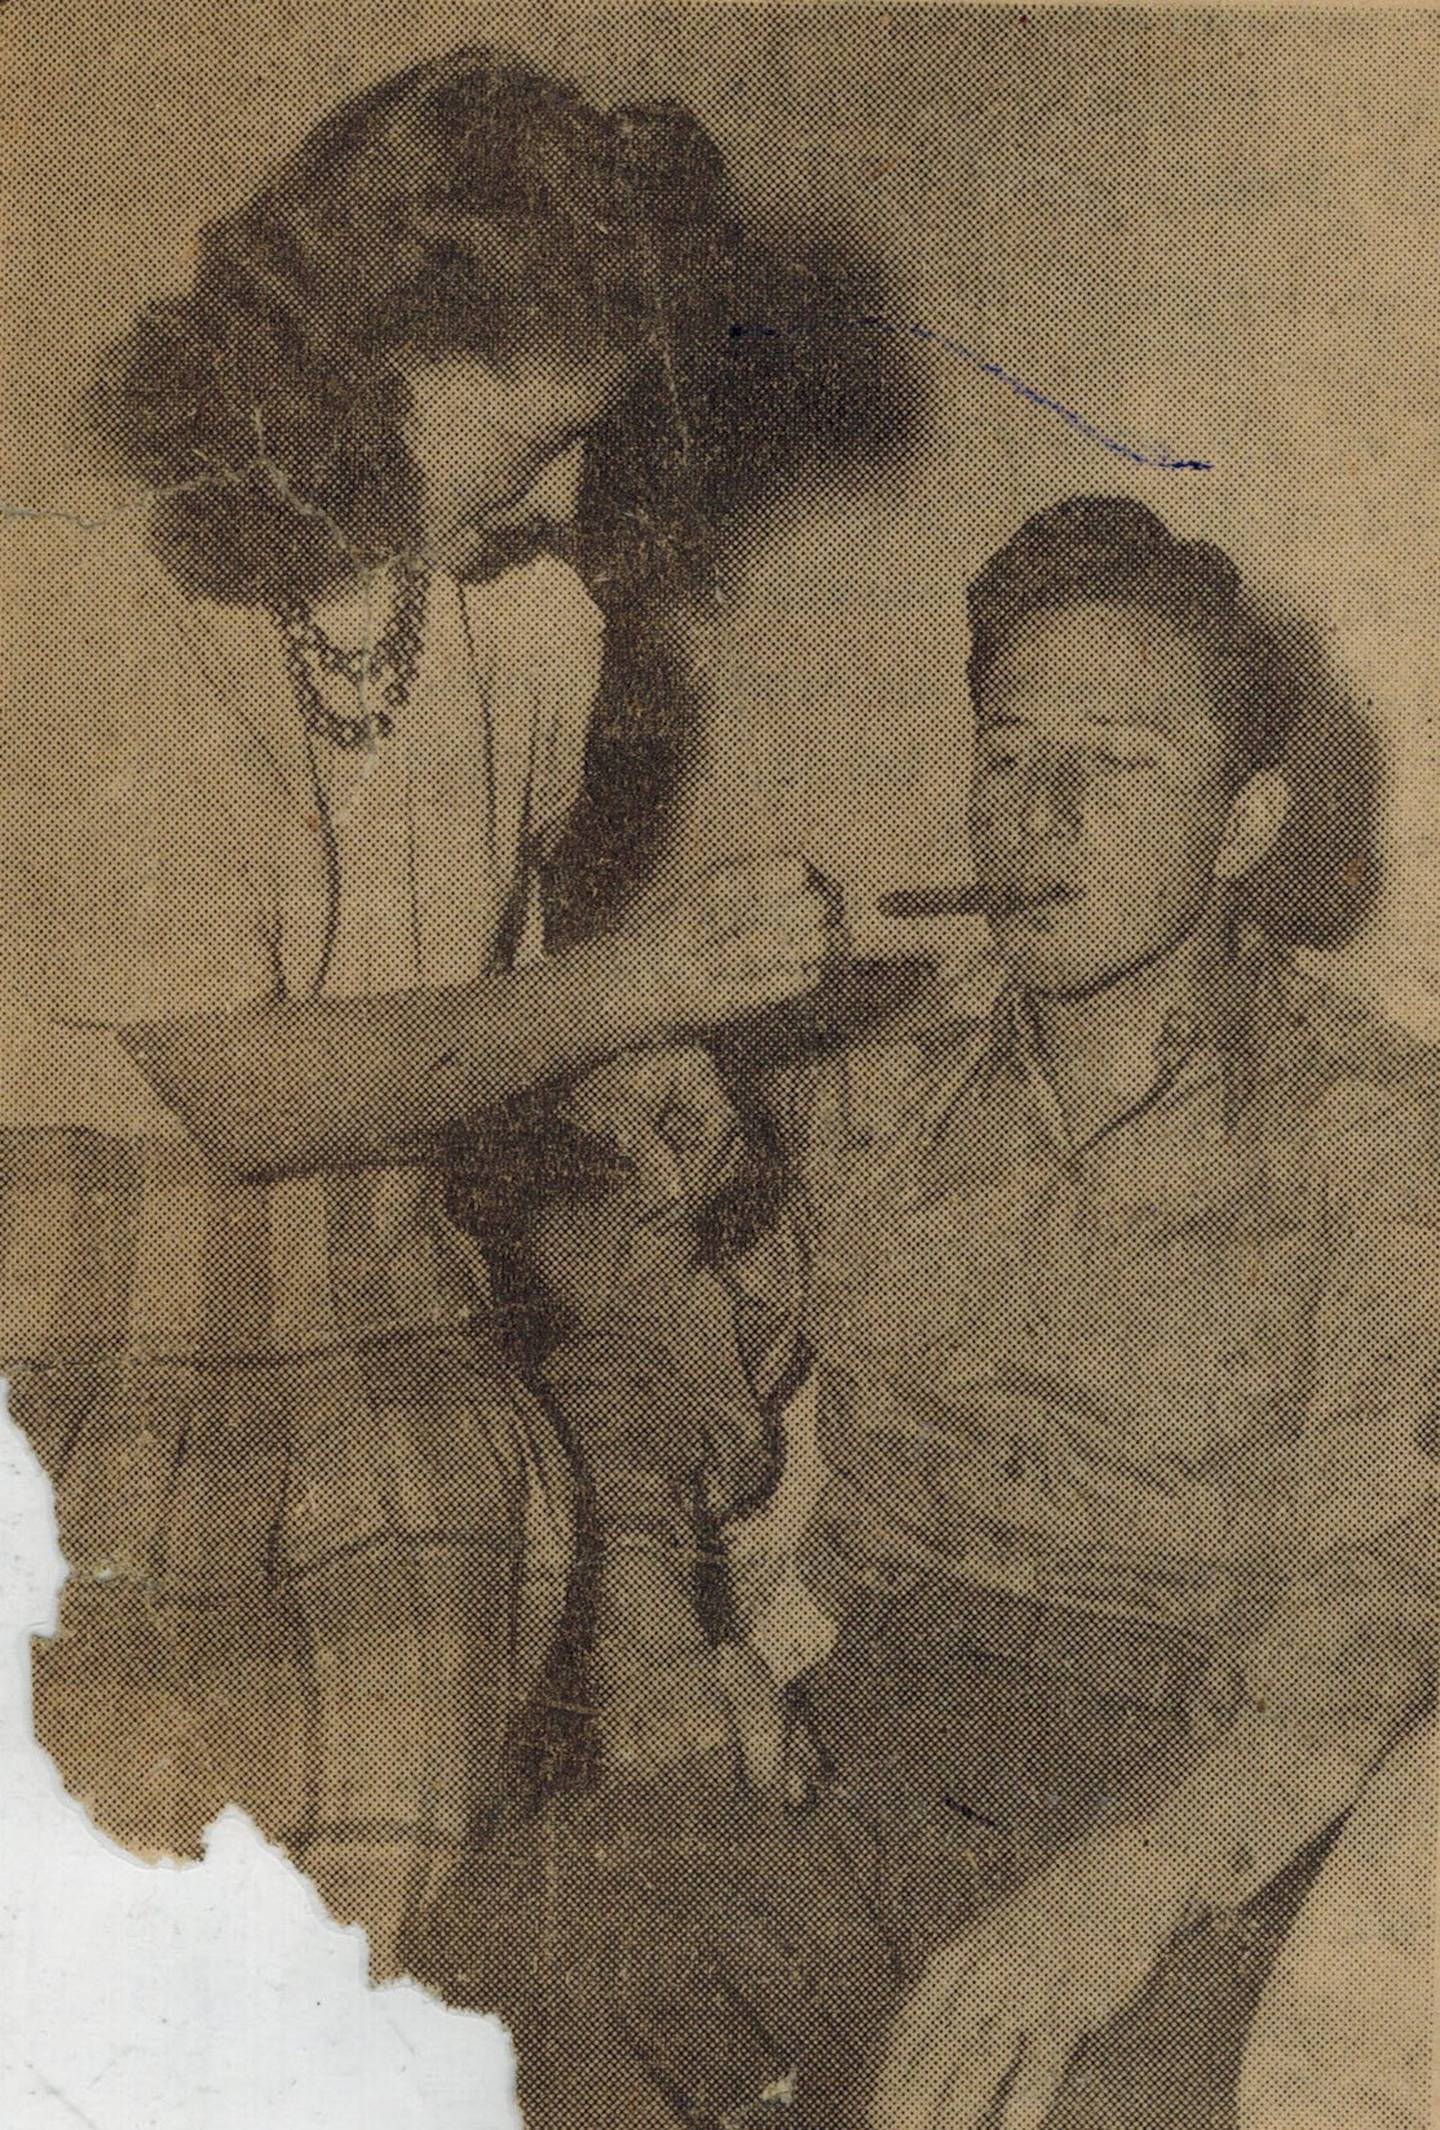 This photo of Henry Ceci (his wife Lillian is lighting his cigar) ran in The Herald-News as part of a larger story of liberated war heroes from Joliet, according to Robert Ceci of Joliet, Henry's nephew. Henry was one of five brothers who served in the Army during World War II and was initially deemed missing in action.